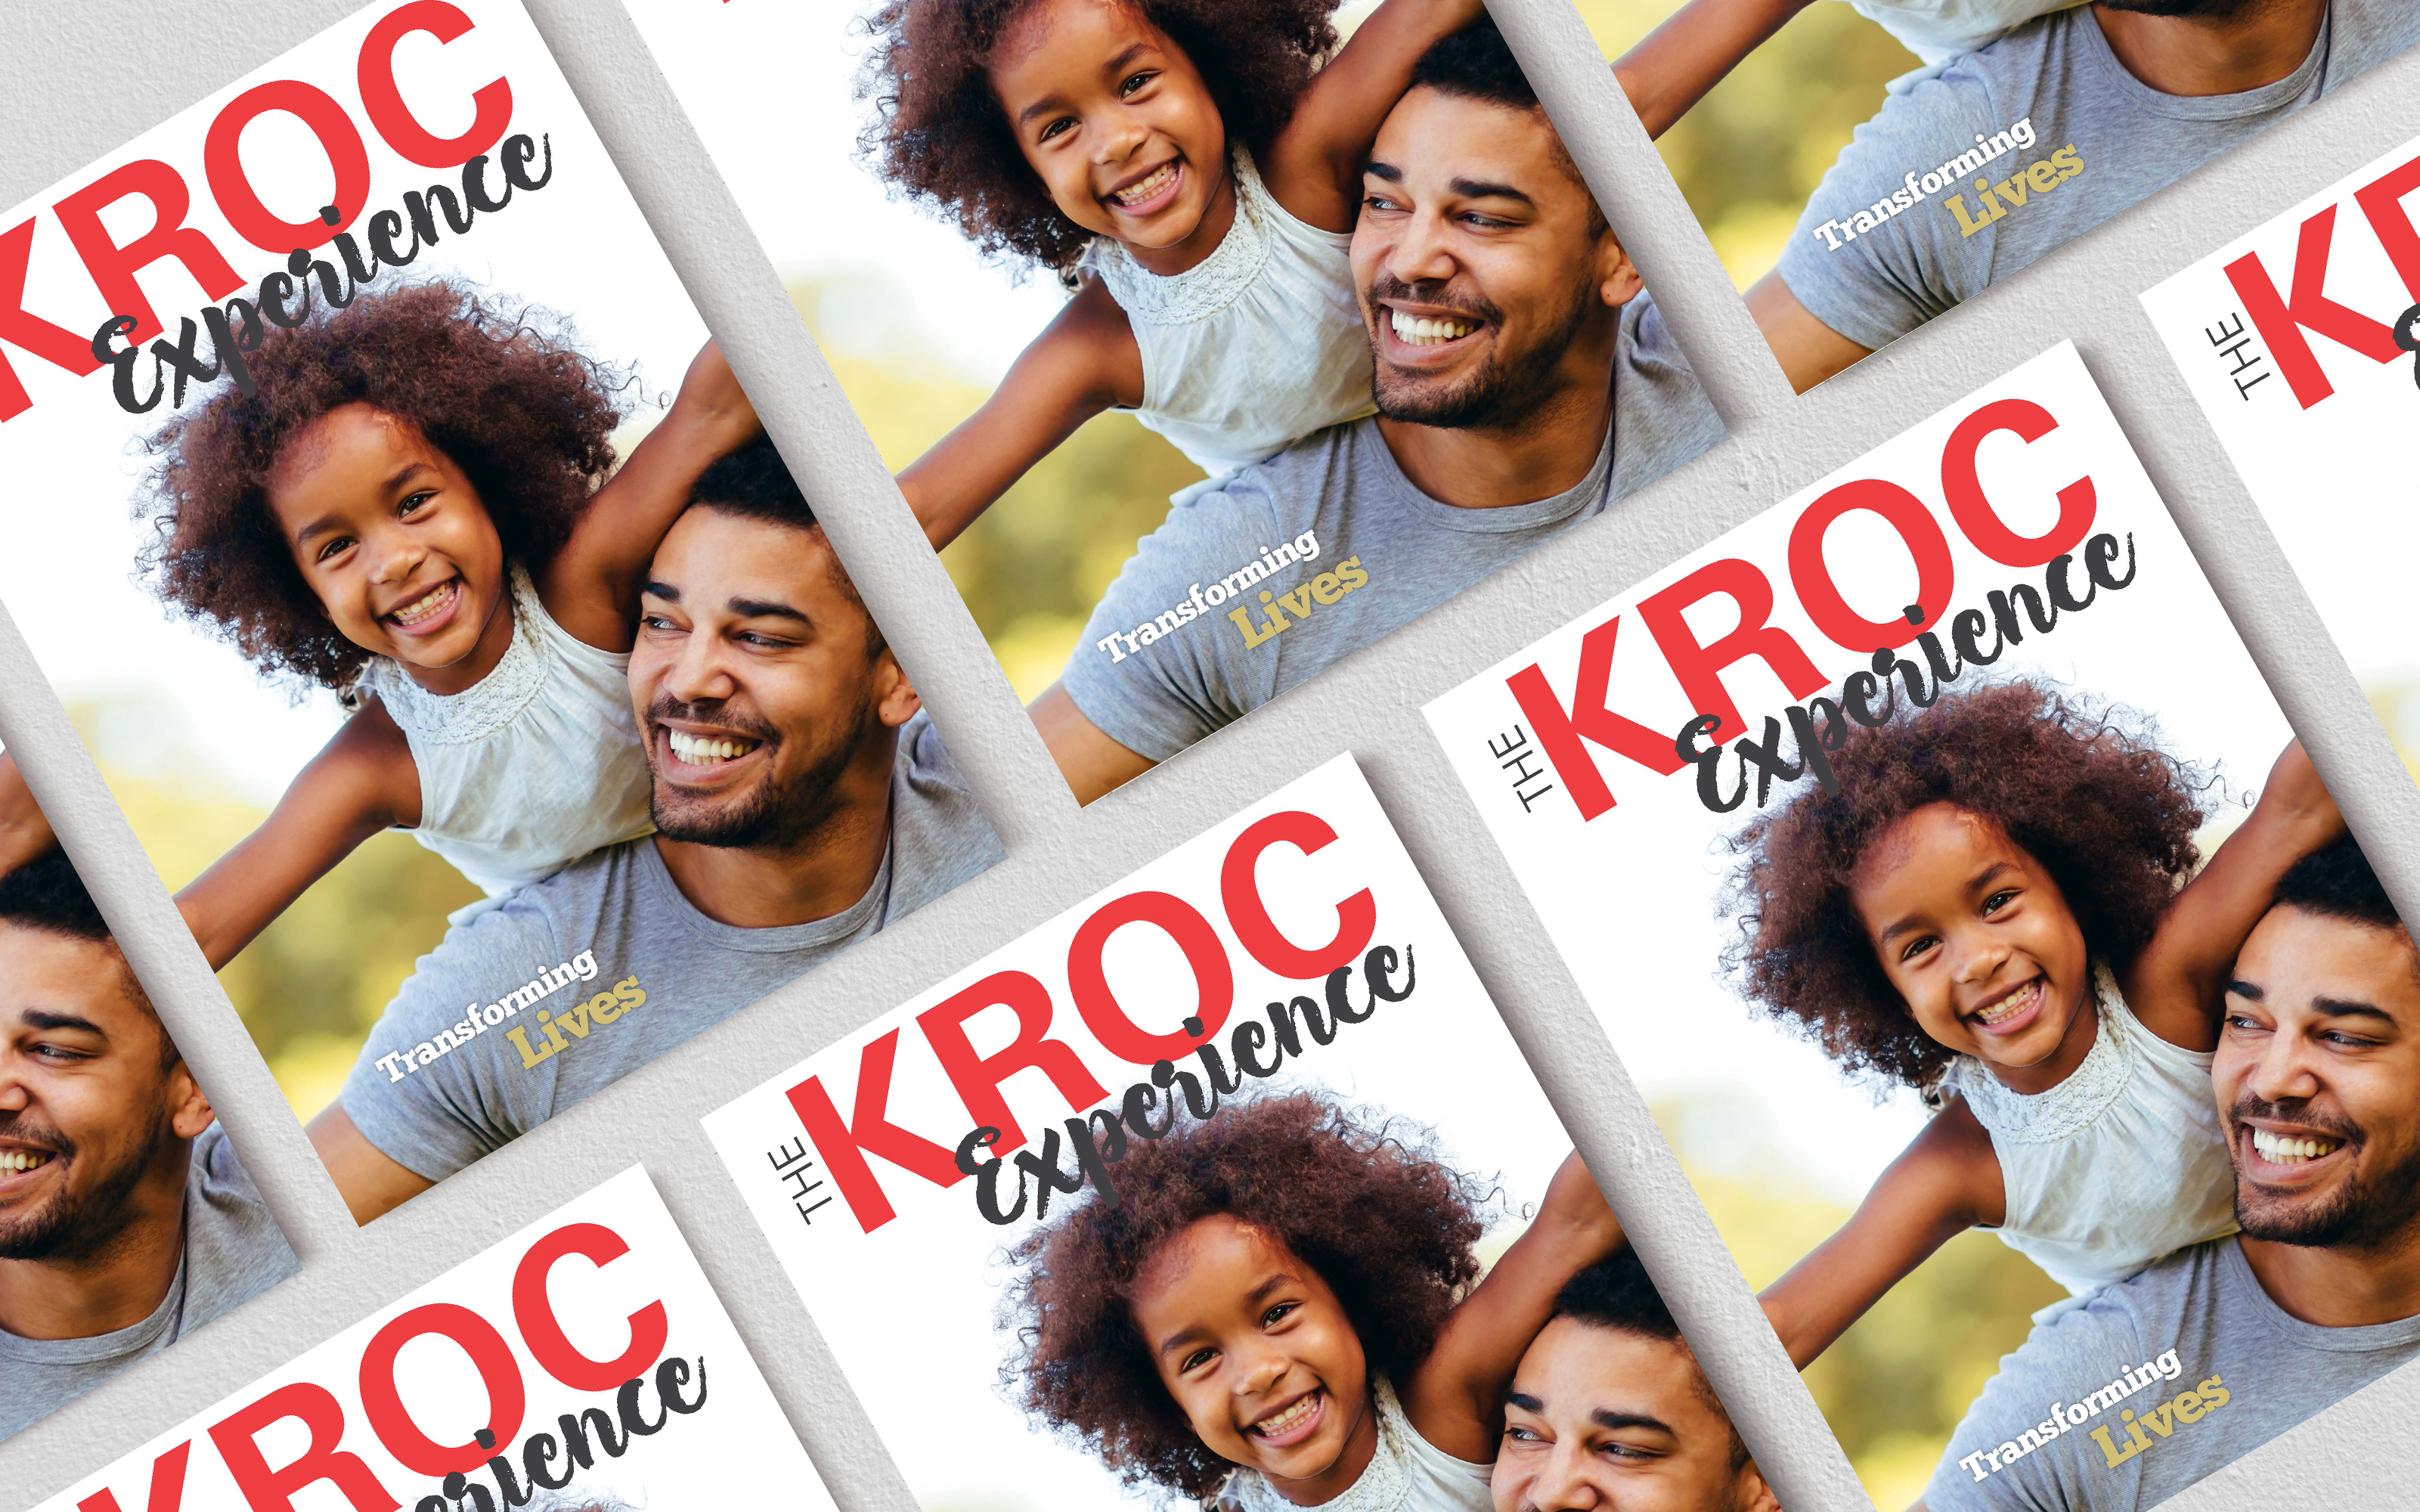 The Salvation Army Kroc Experience